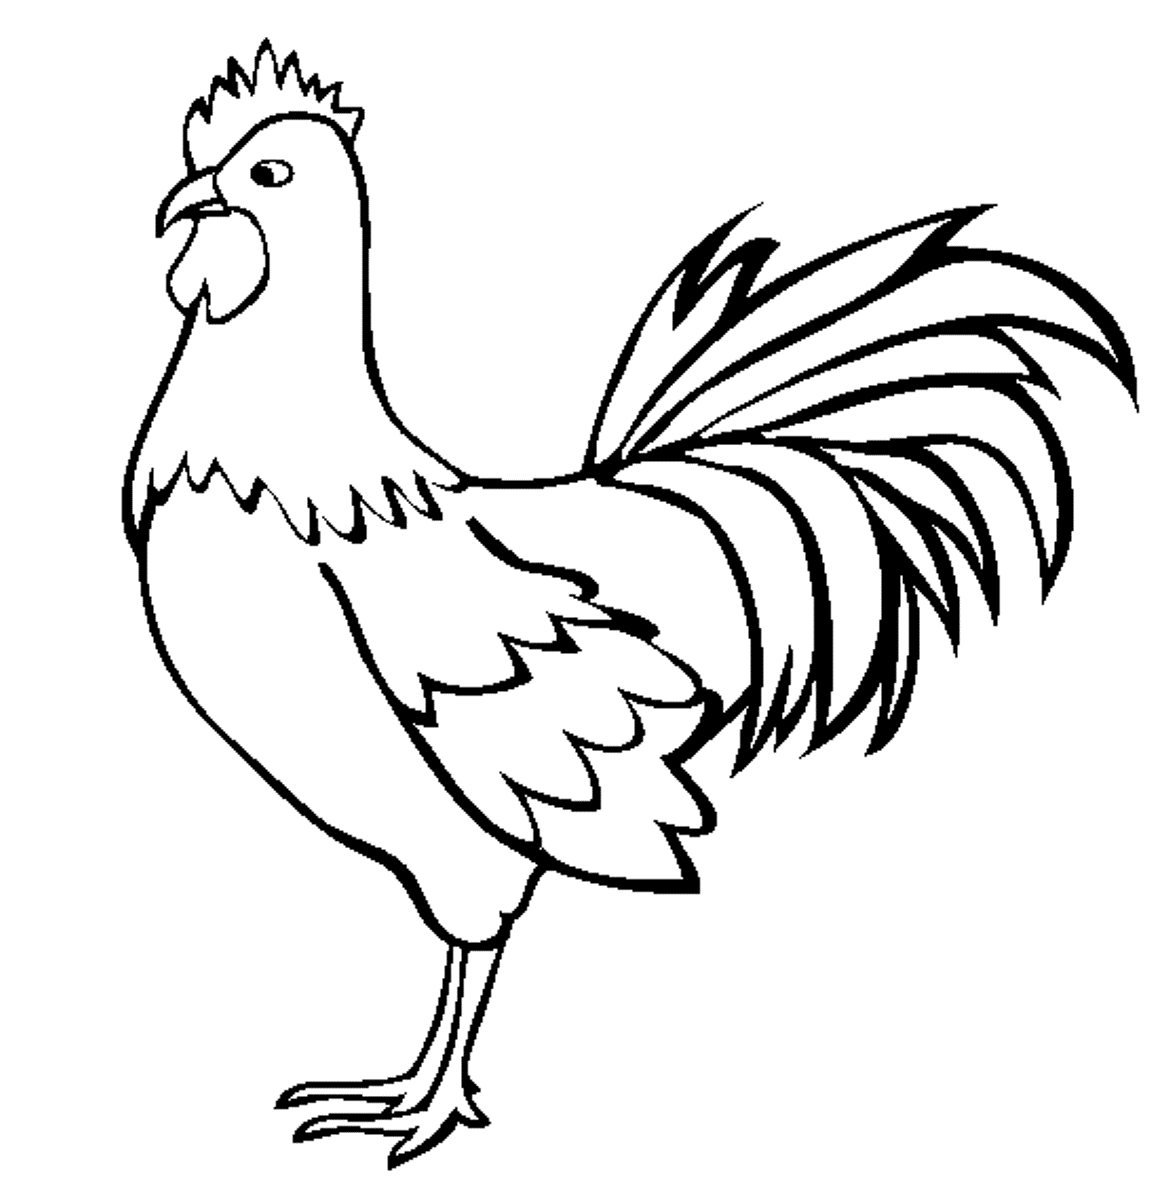 Rooster clipart black and white